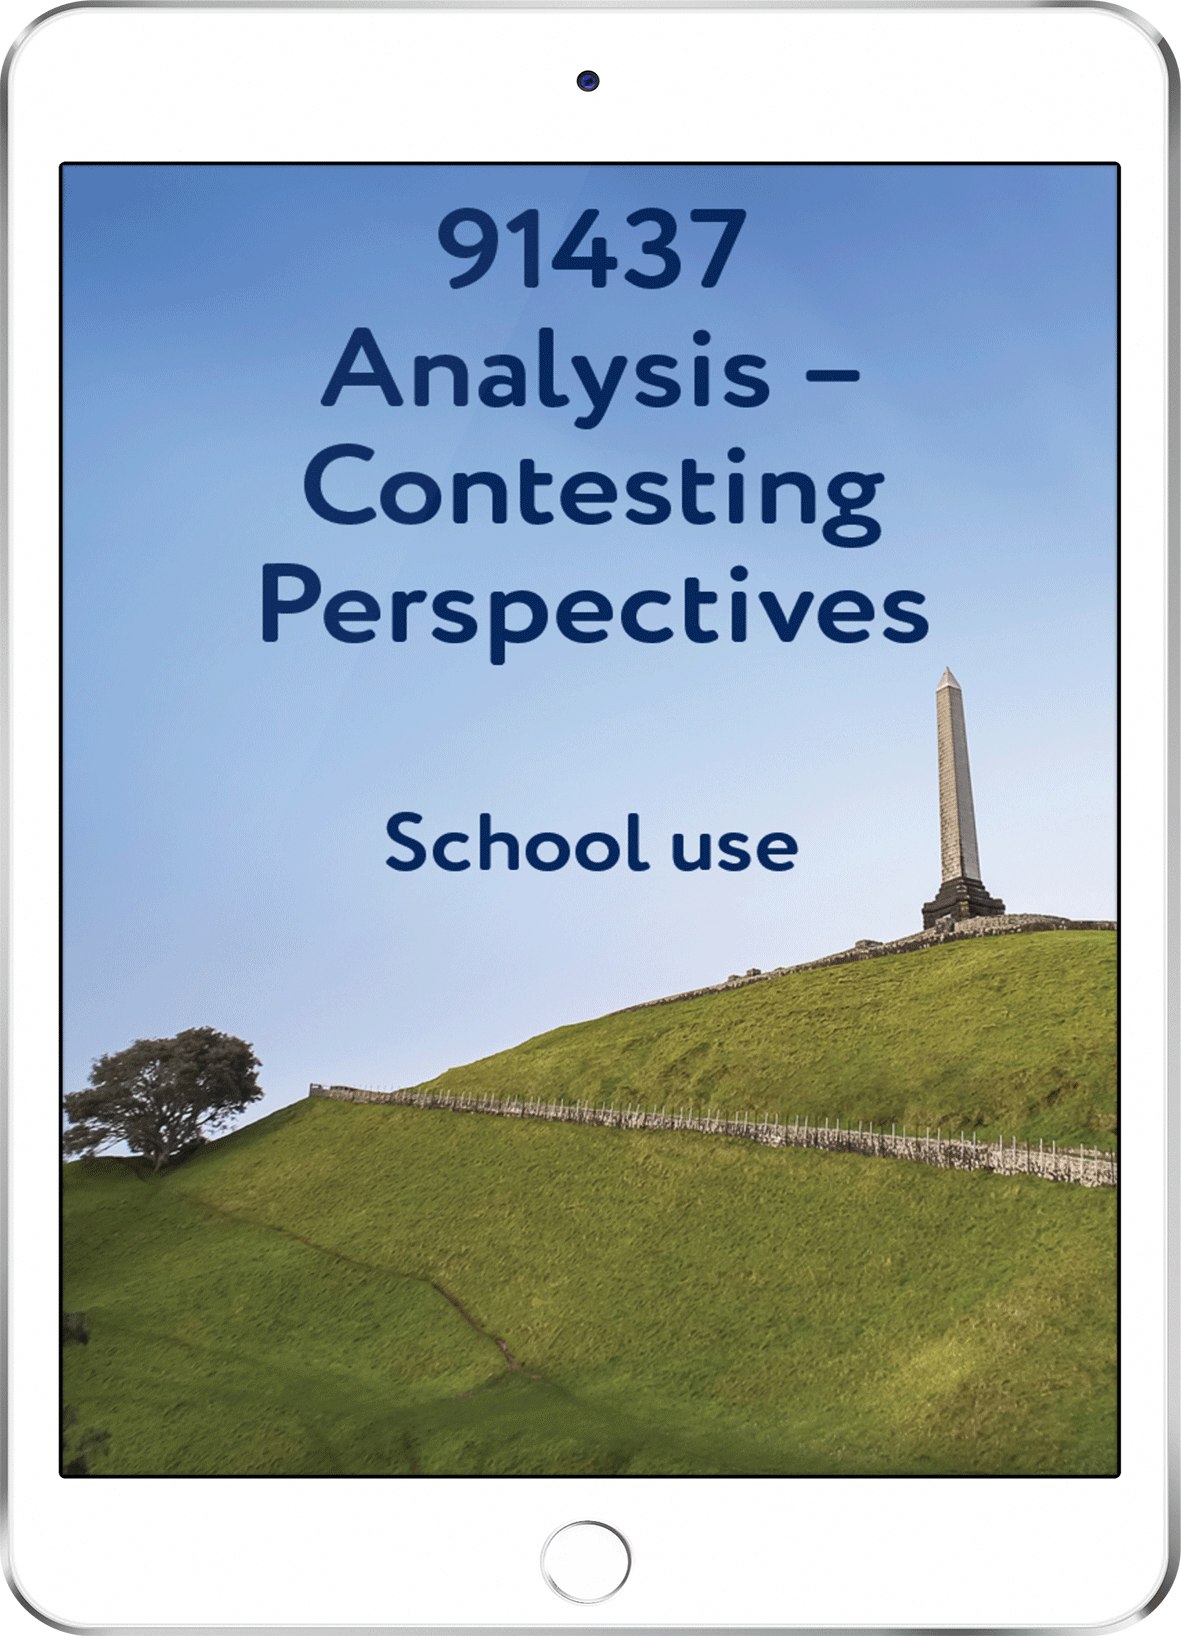 91437 Analysis - Contesting Perspectives - School Use